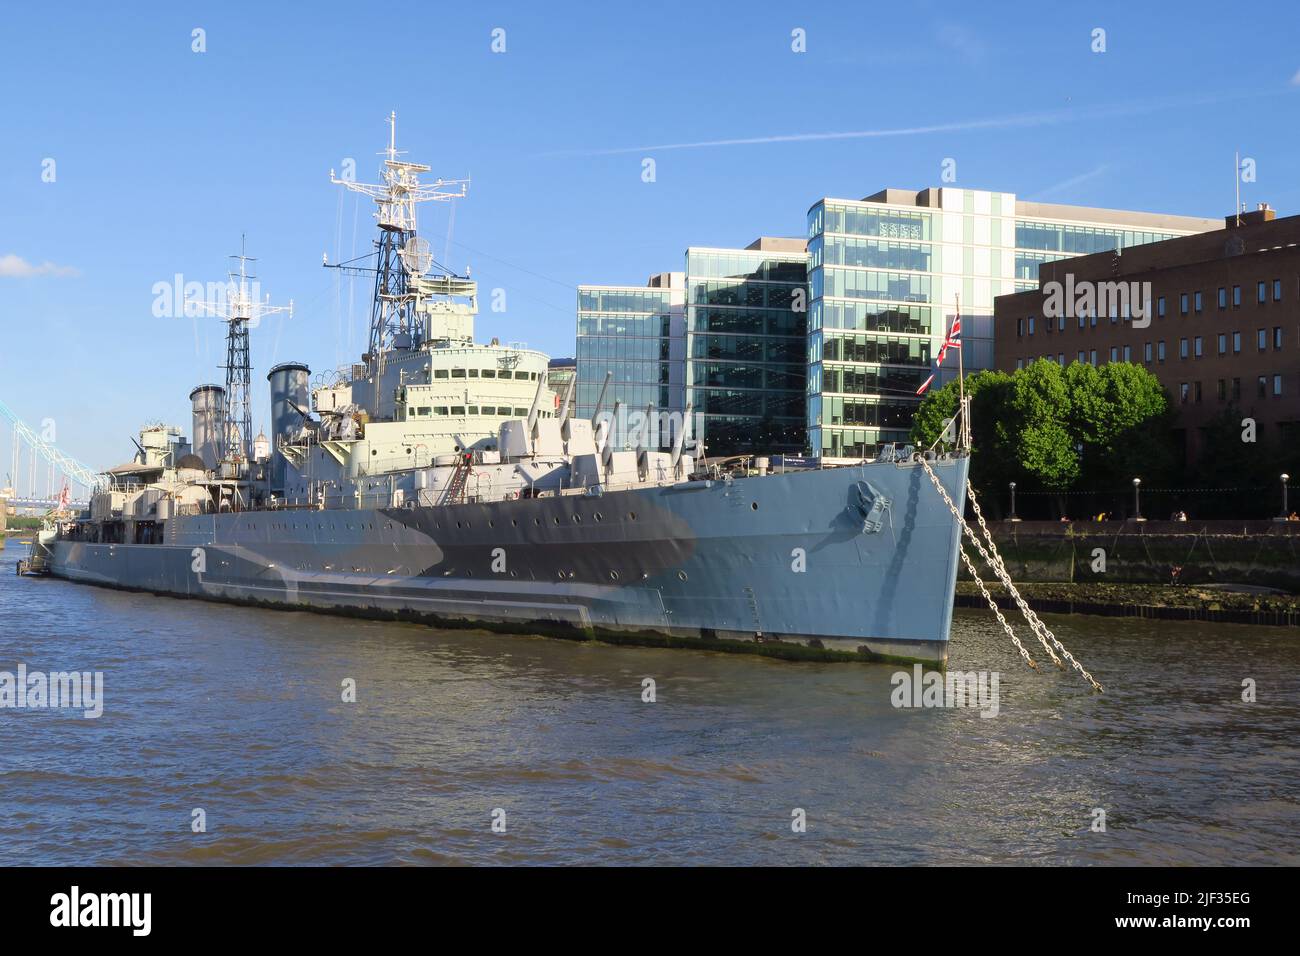 HMS Belfast, a WW2 cruiser, is moored on the south bank of the River Thames in London close to Tower Bridge. It serves as a living museum and tourist Stock Photo